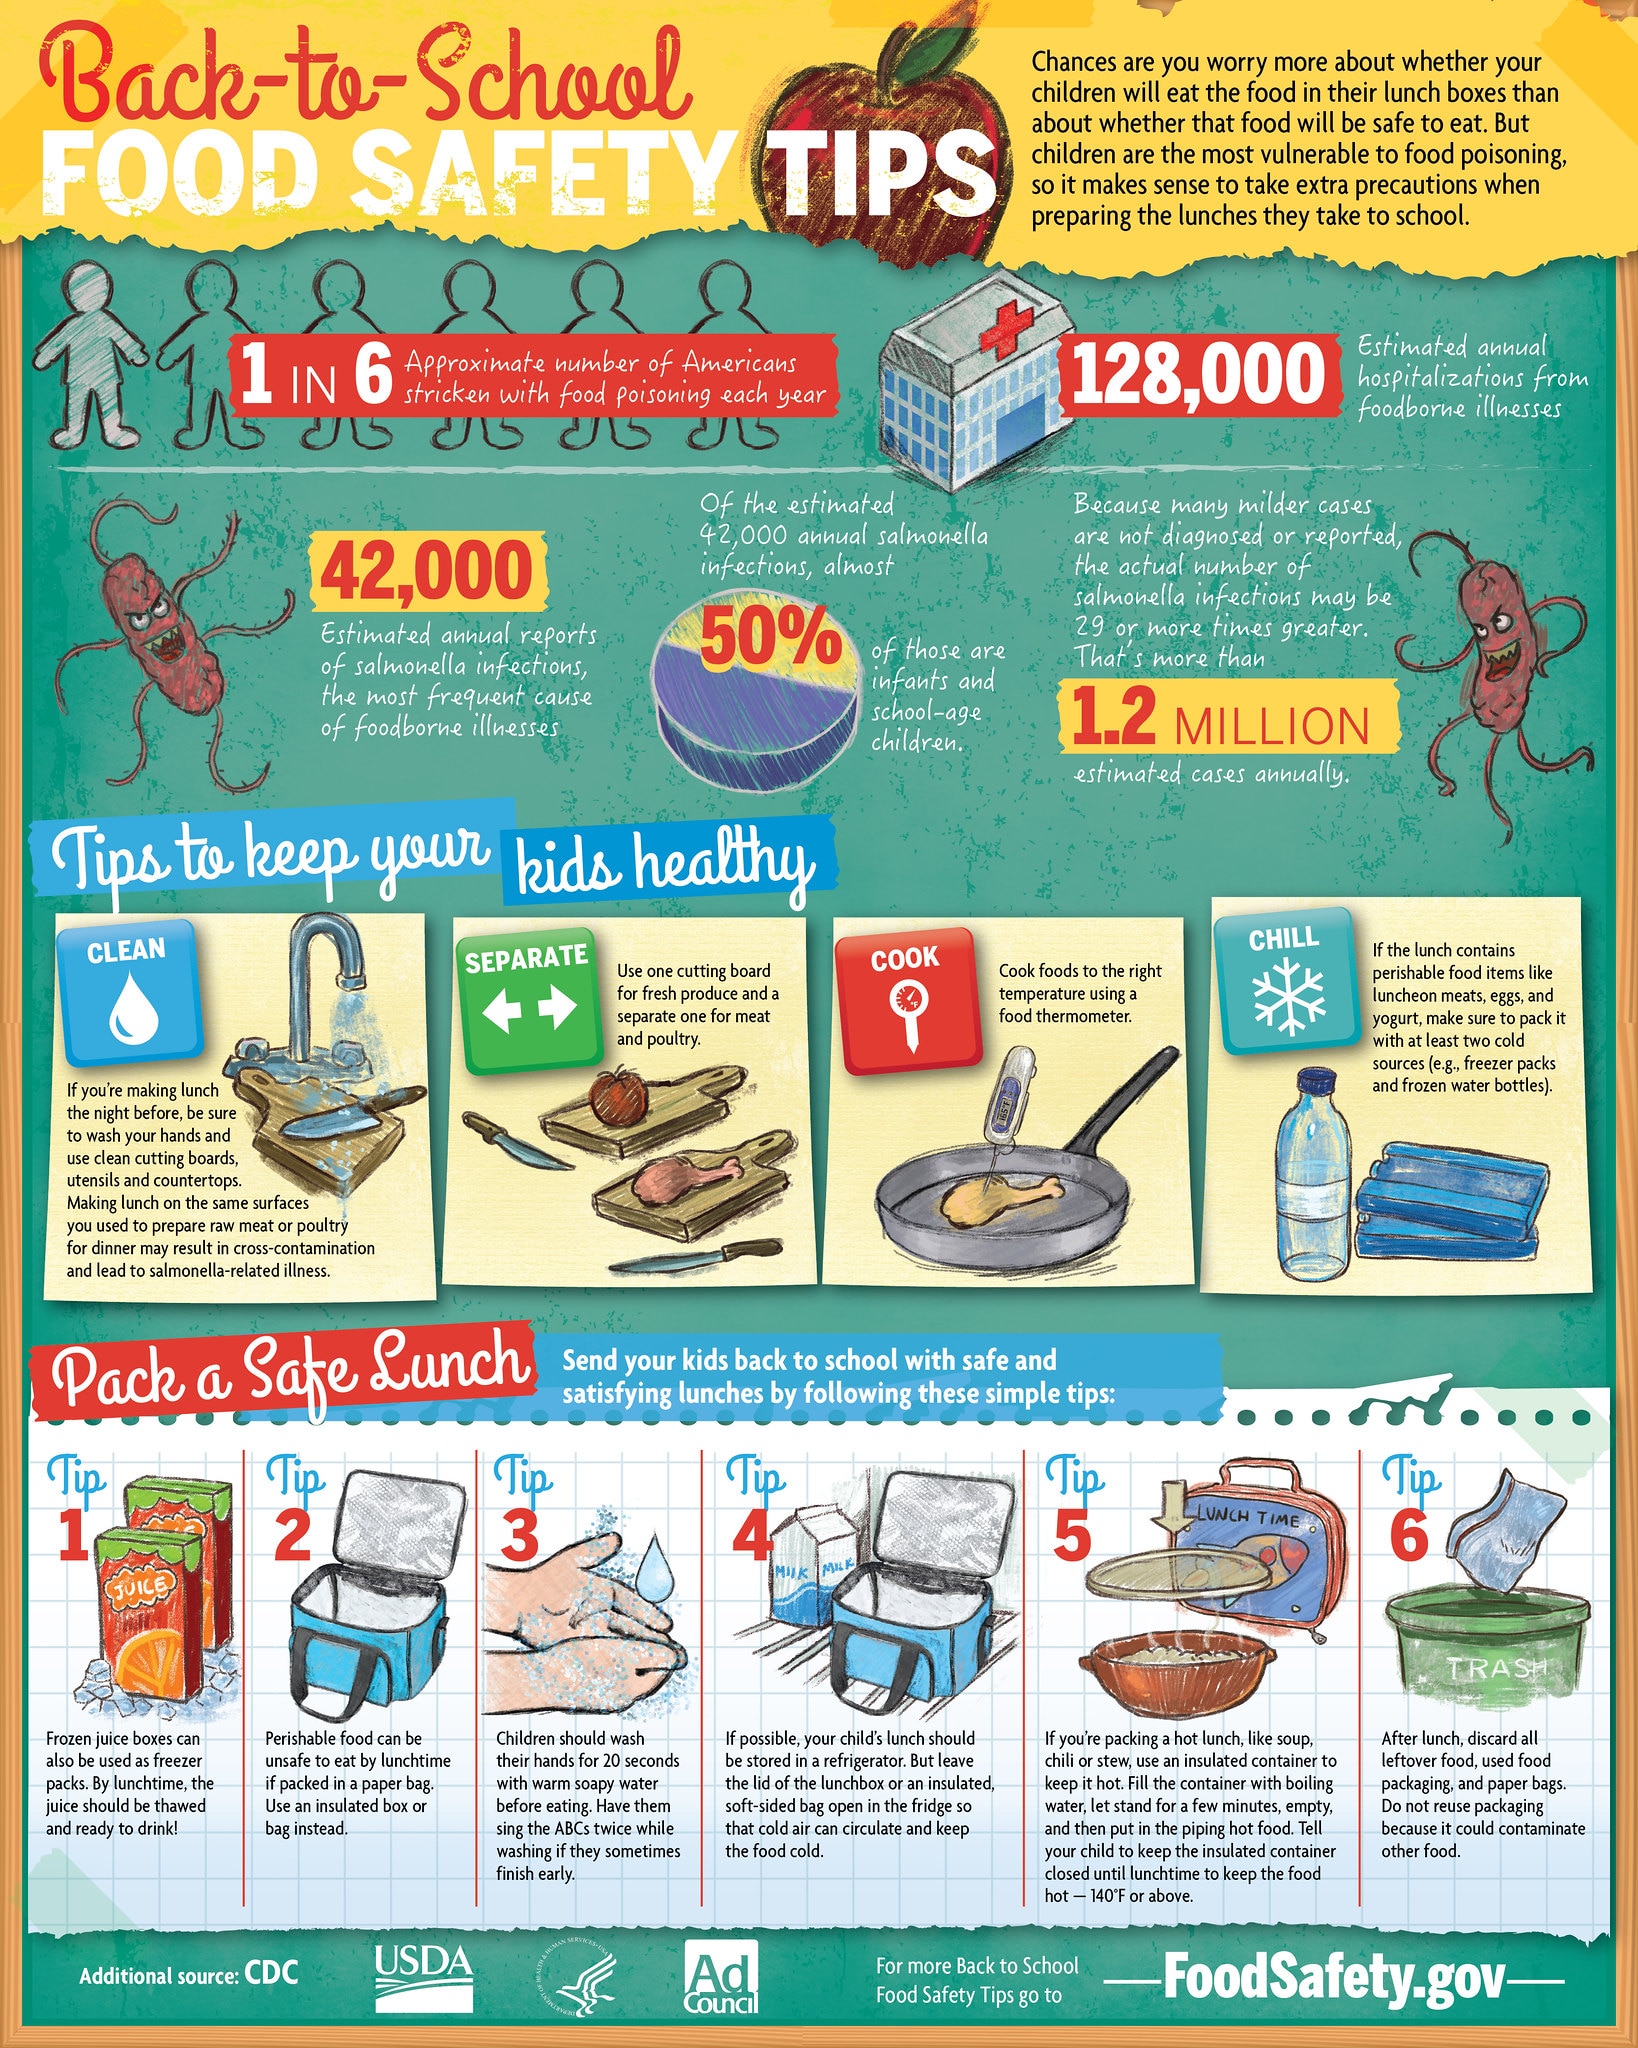 Infographic from FoodSafety.gov with back-to-school food safety tips and steps for preparing safe school lunches.